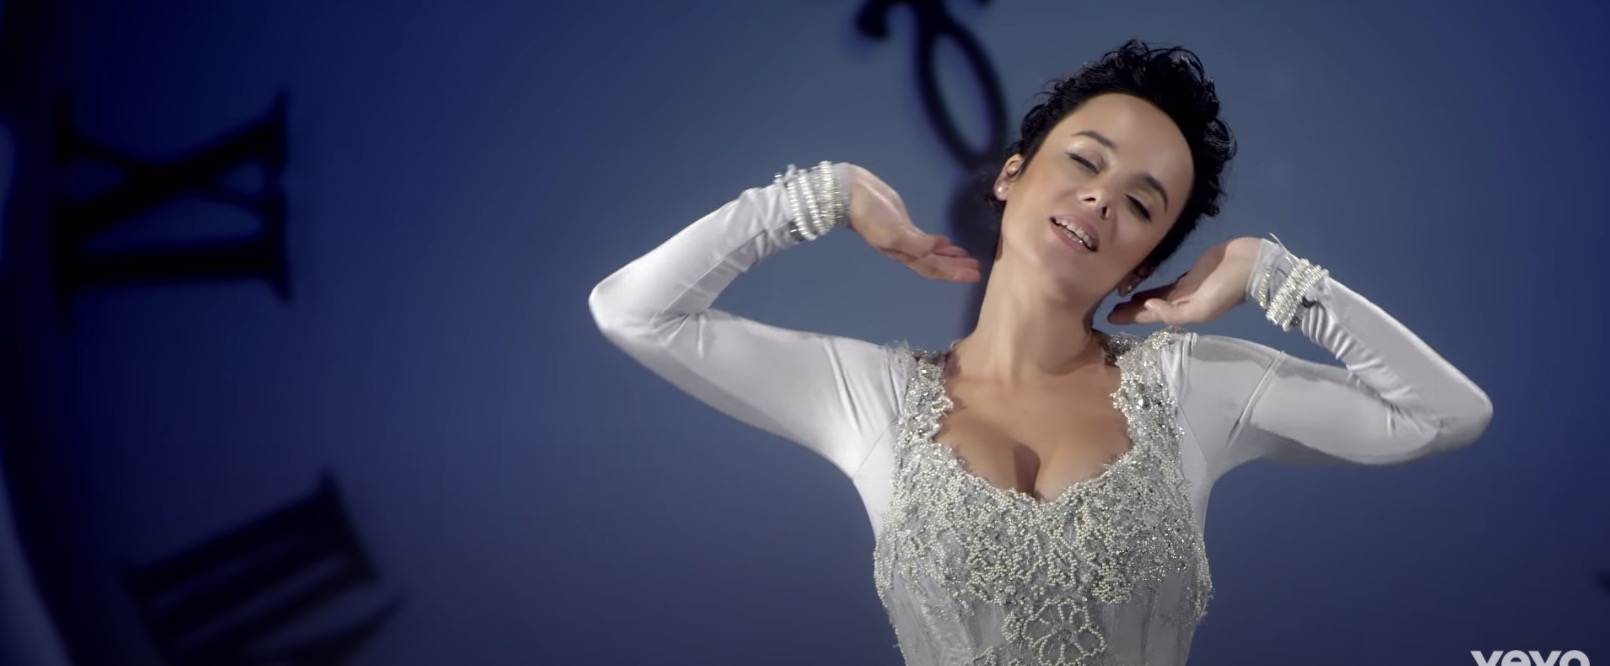 Aurore_donguy_alizee_clip_video-1